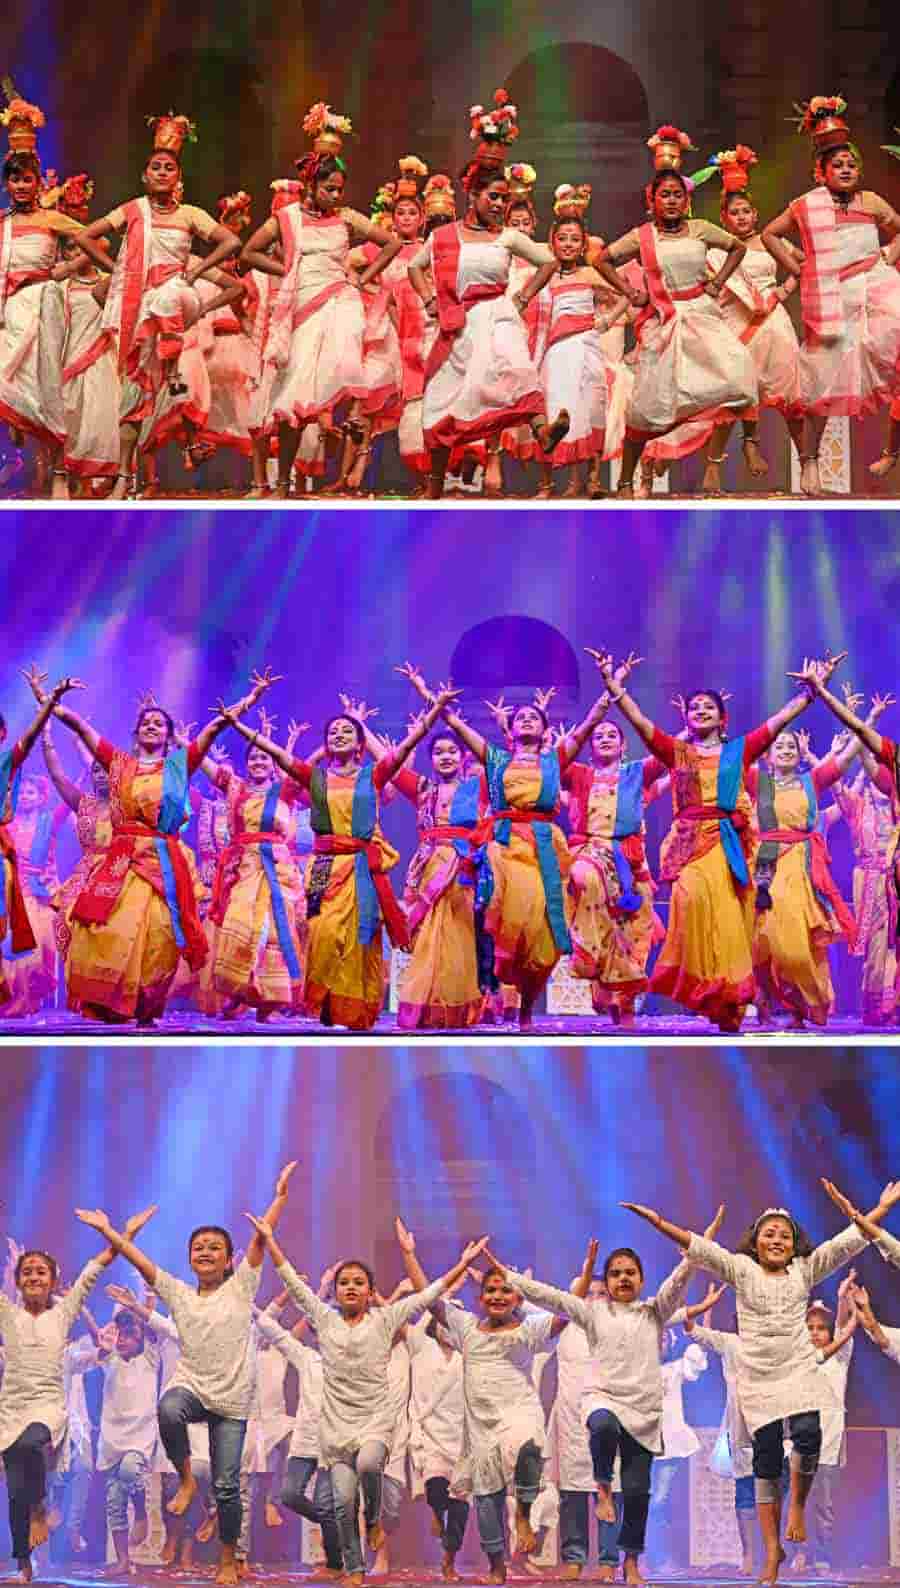 The programme began with a celebration of the essence of Dol in Bengal through dance. Dance performances on Rabindra Sangeet, folk songs about Dol and other popular Bengali songs enlivened the evening